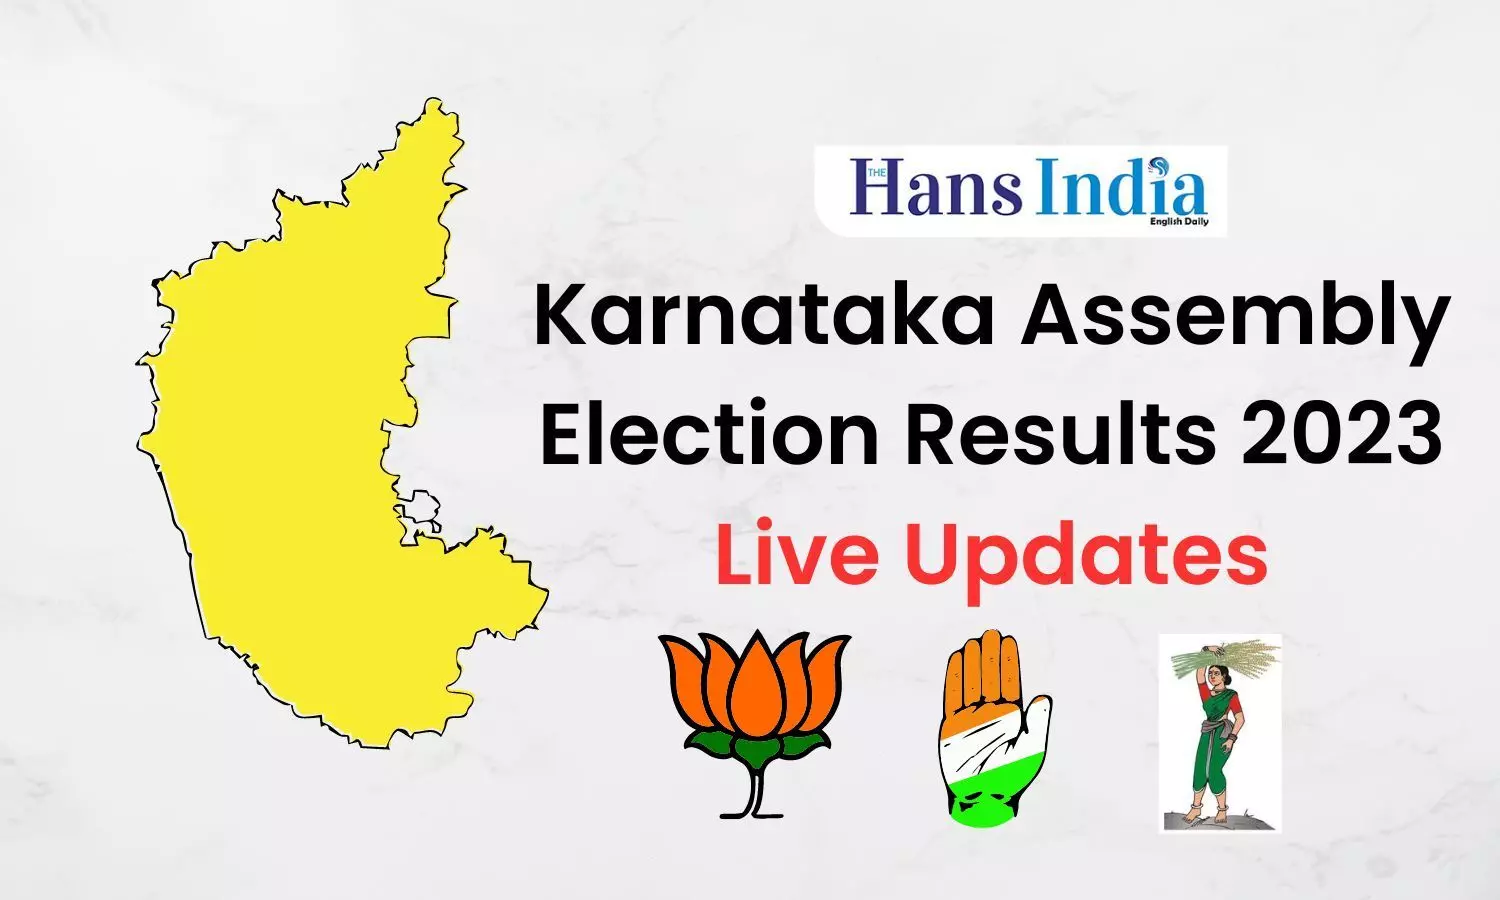 Karnataka Assembly Election Results 2023 Live Updates: Congress leading in most seats of polarised Karnataka district